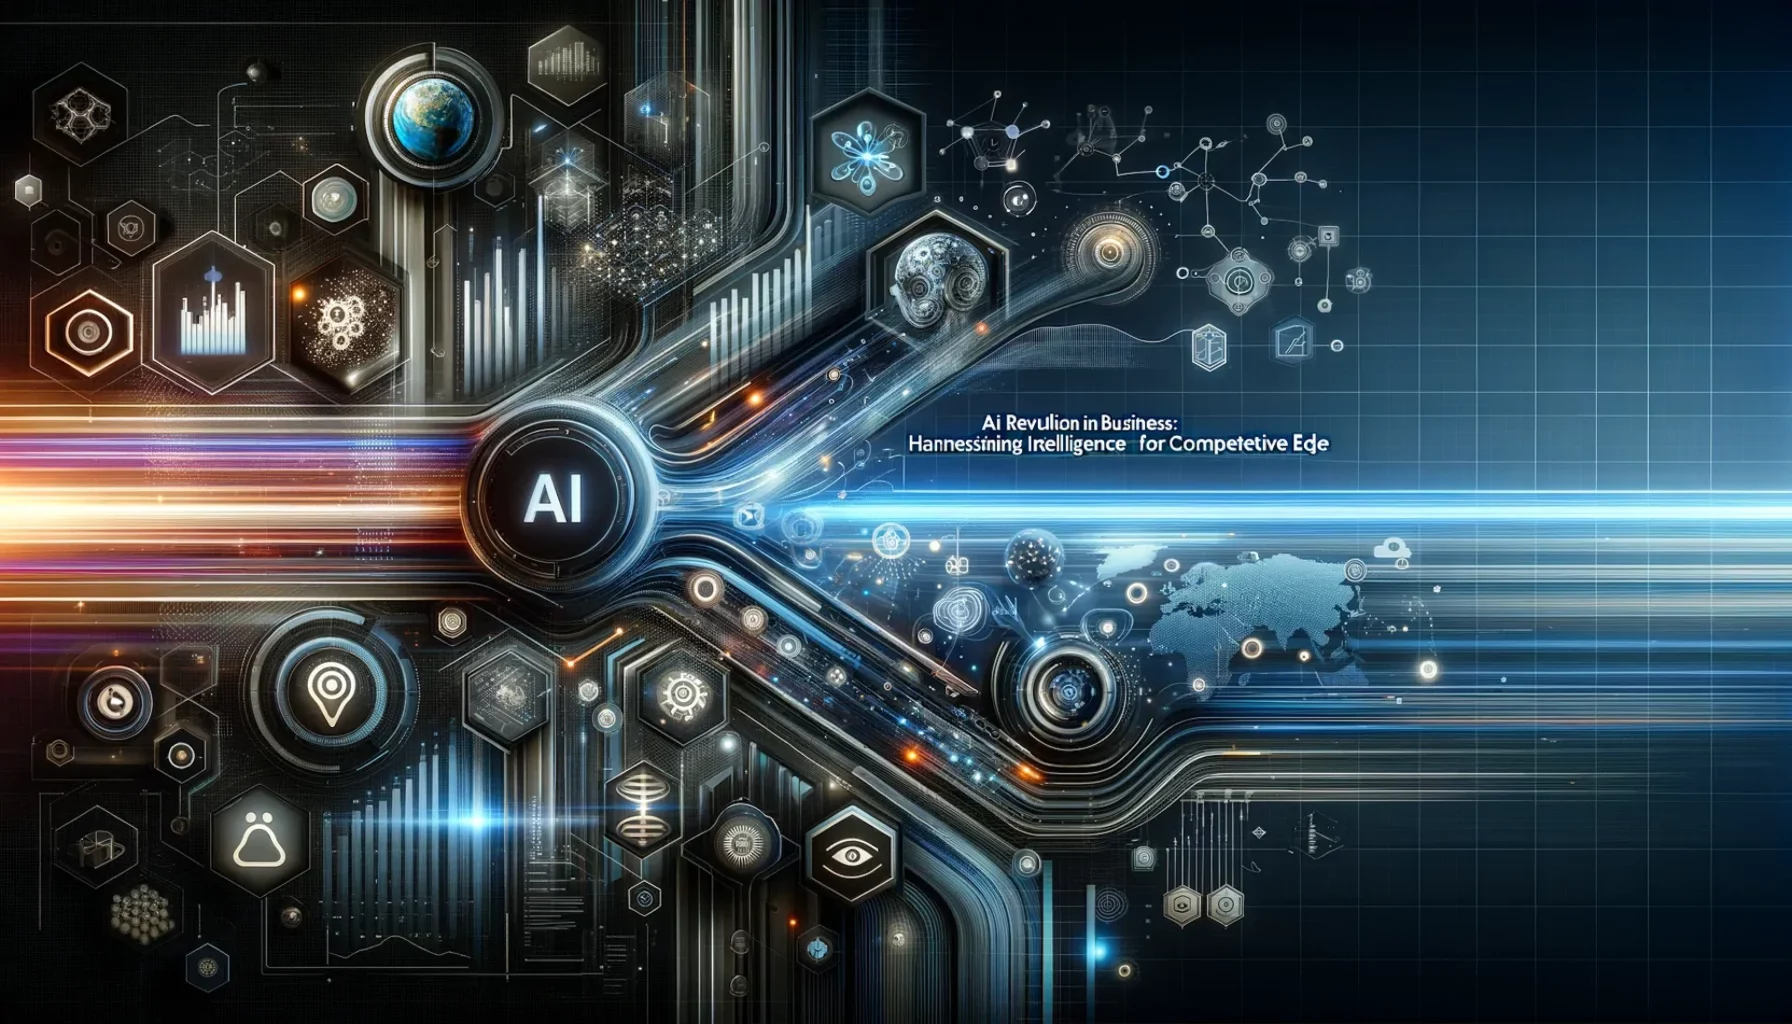 AI Revolution in Business Harnessing Intelligence for Competitive Edge